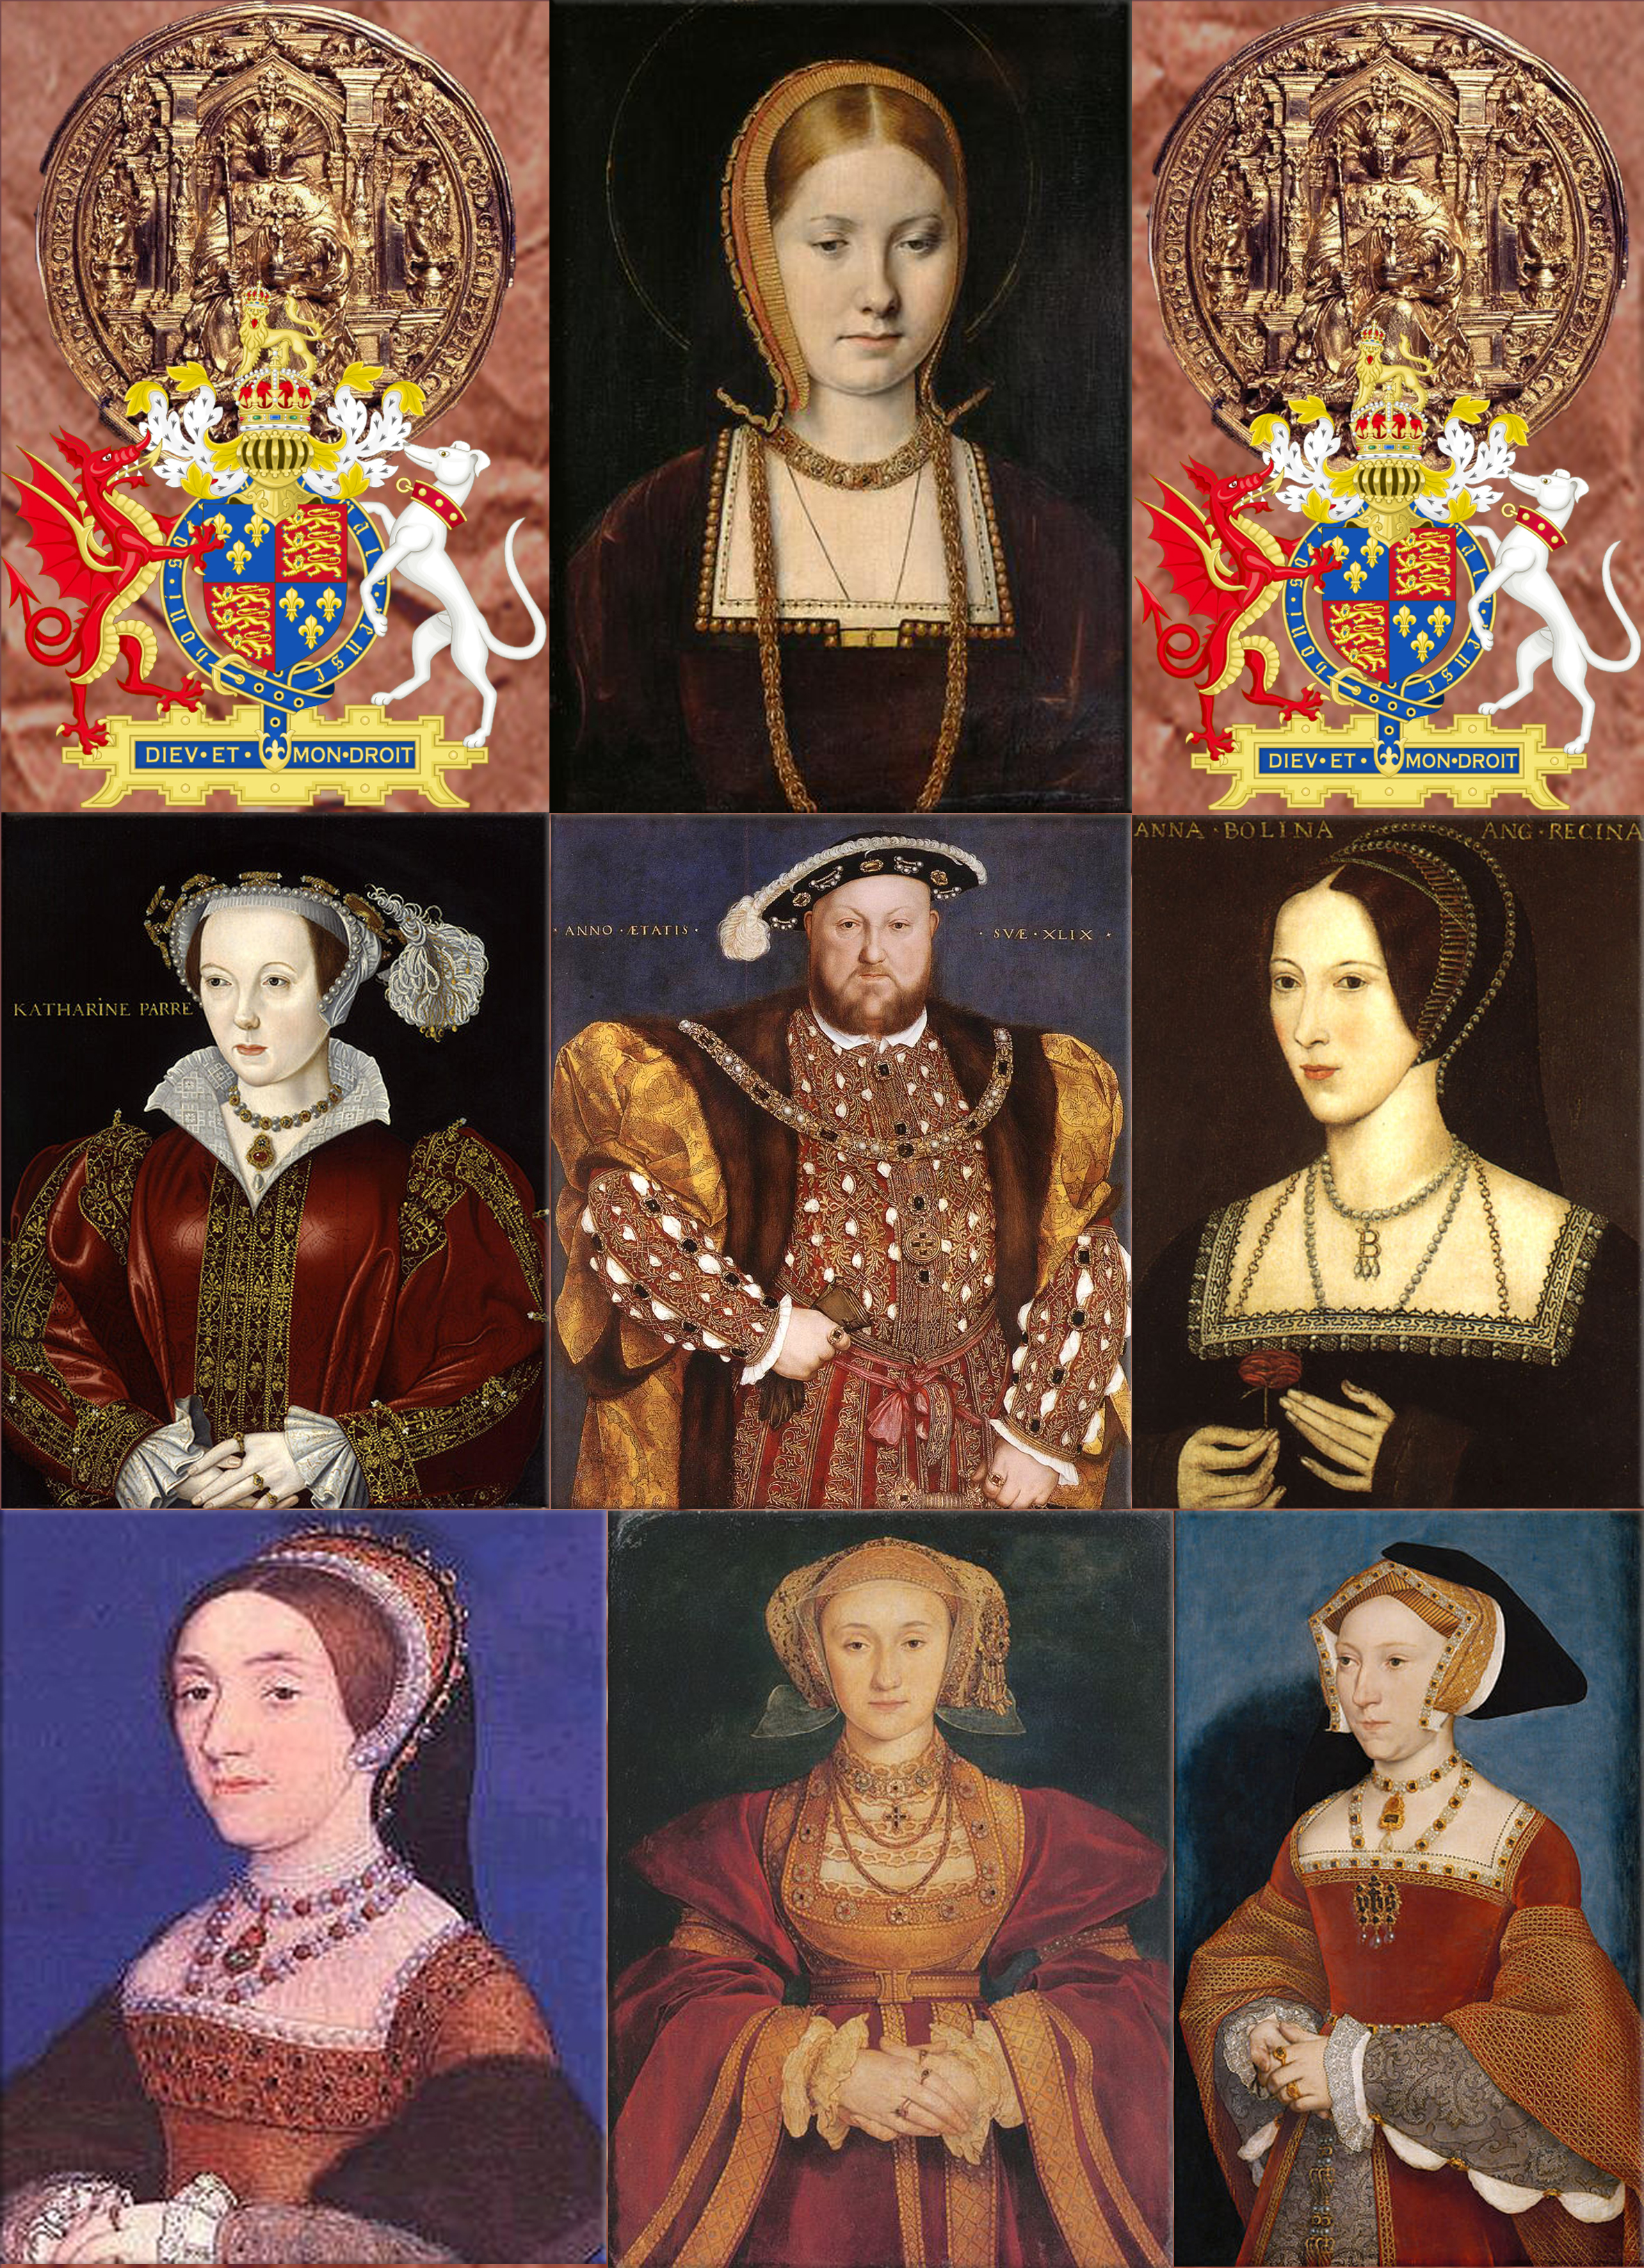 Henry VIII; Coat of Arms and Seal of Henry VIII of England; Catherine of Aragon as a young widow, by court painter Michael Sittow, 1502; Anne Boleyn, Henry's second queen; a later copy of an original painted 1534; Jane Seymour<, Henry's third wife; Anne of Cleves, Henry's forth wife by Hans Holbein the Younger, 1539; Catherine Howard<, Henry's fifth wife, by Hans Holbein the Younger, 1540; Catherine Parr, Henry's sixth and last wife